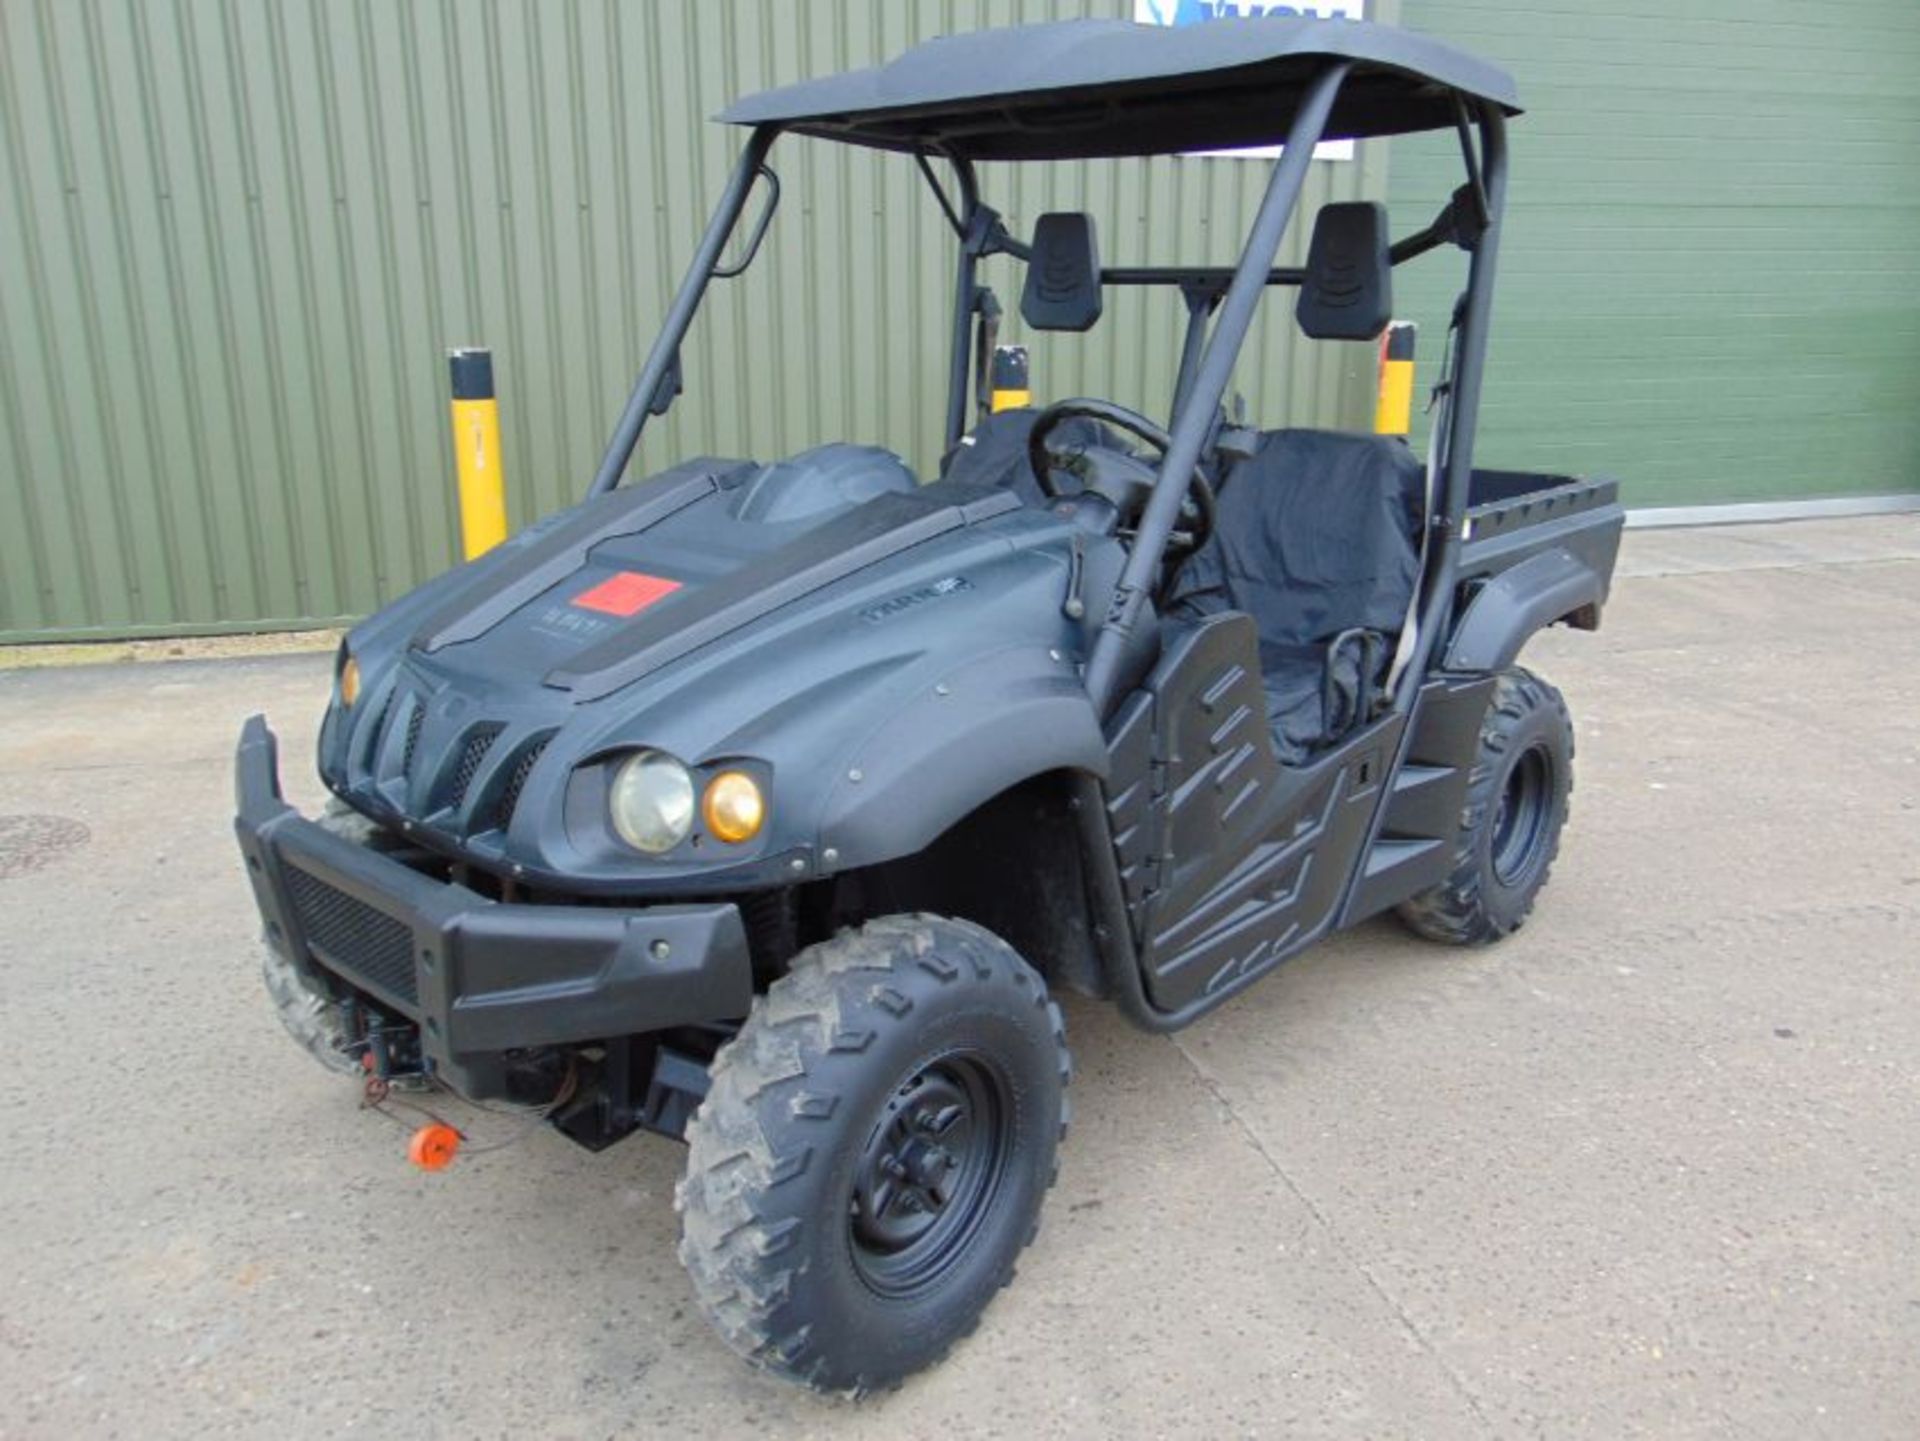 FARR 700 EFI Utility Vehicle ONLY 403 HOURS! - Image 2 of 22